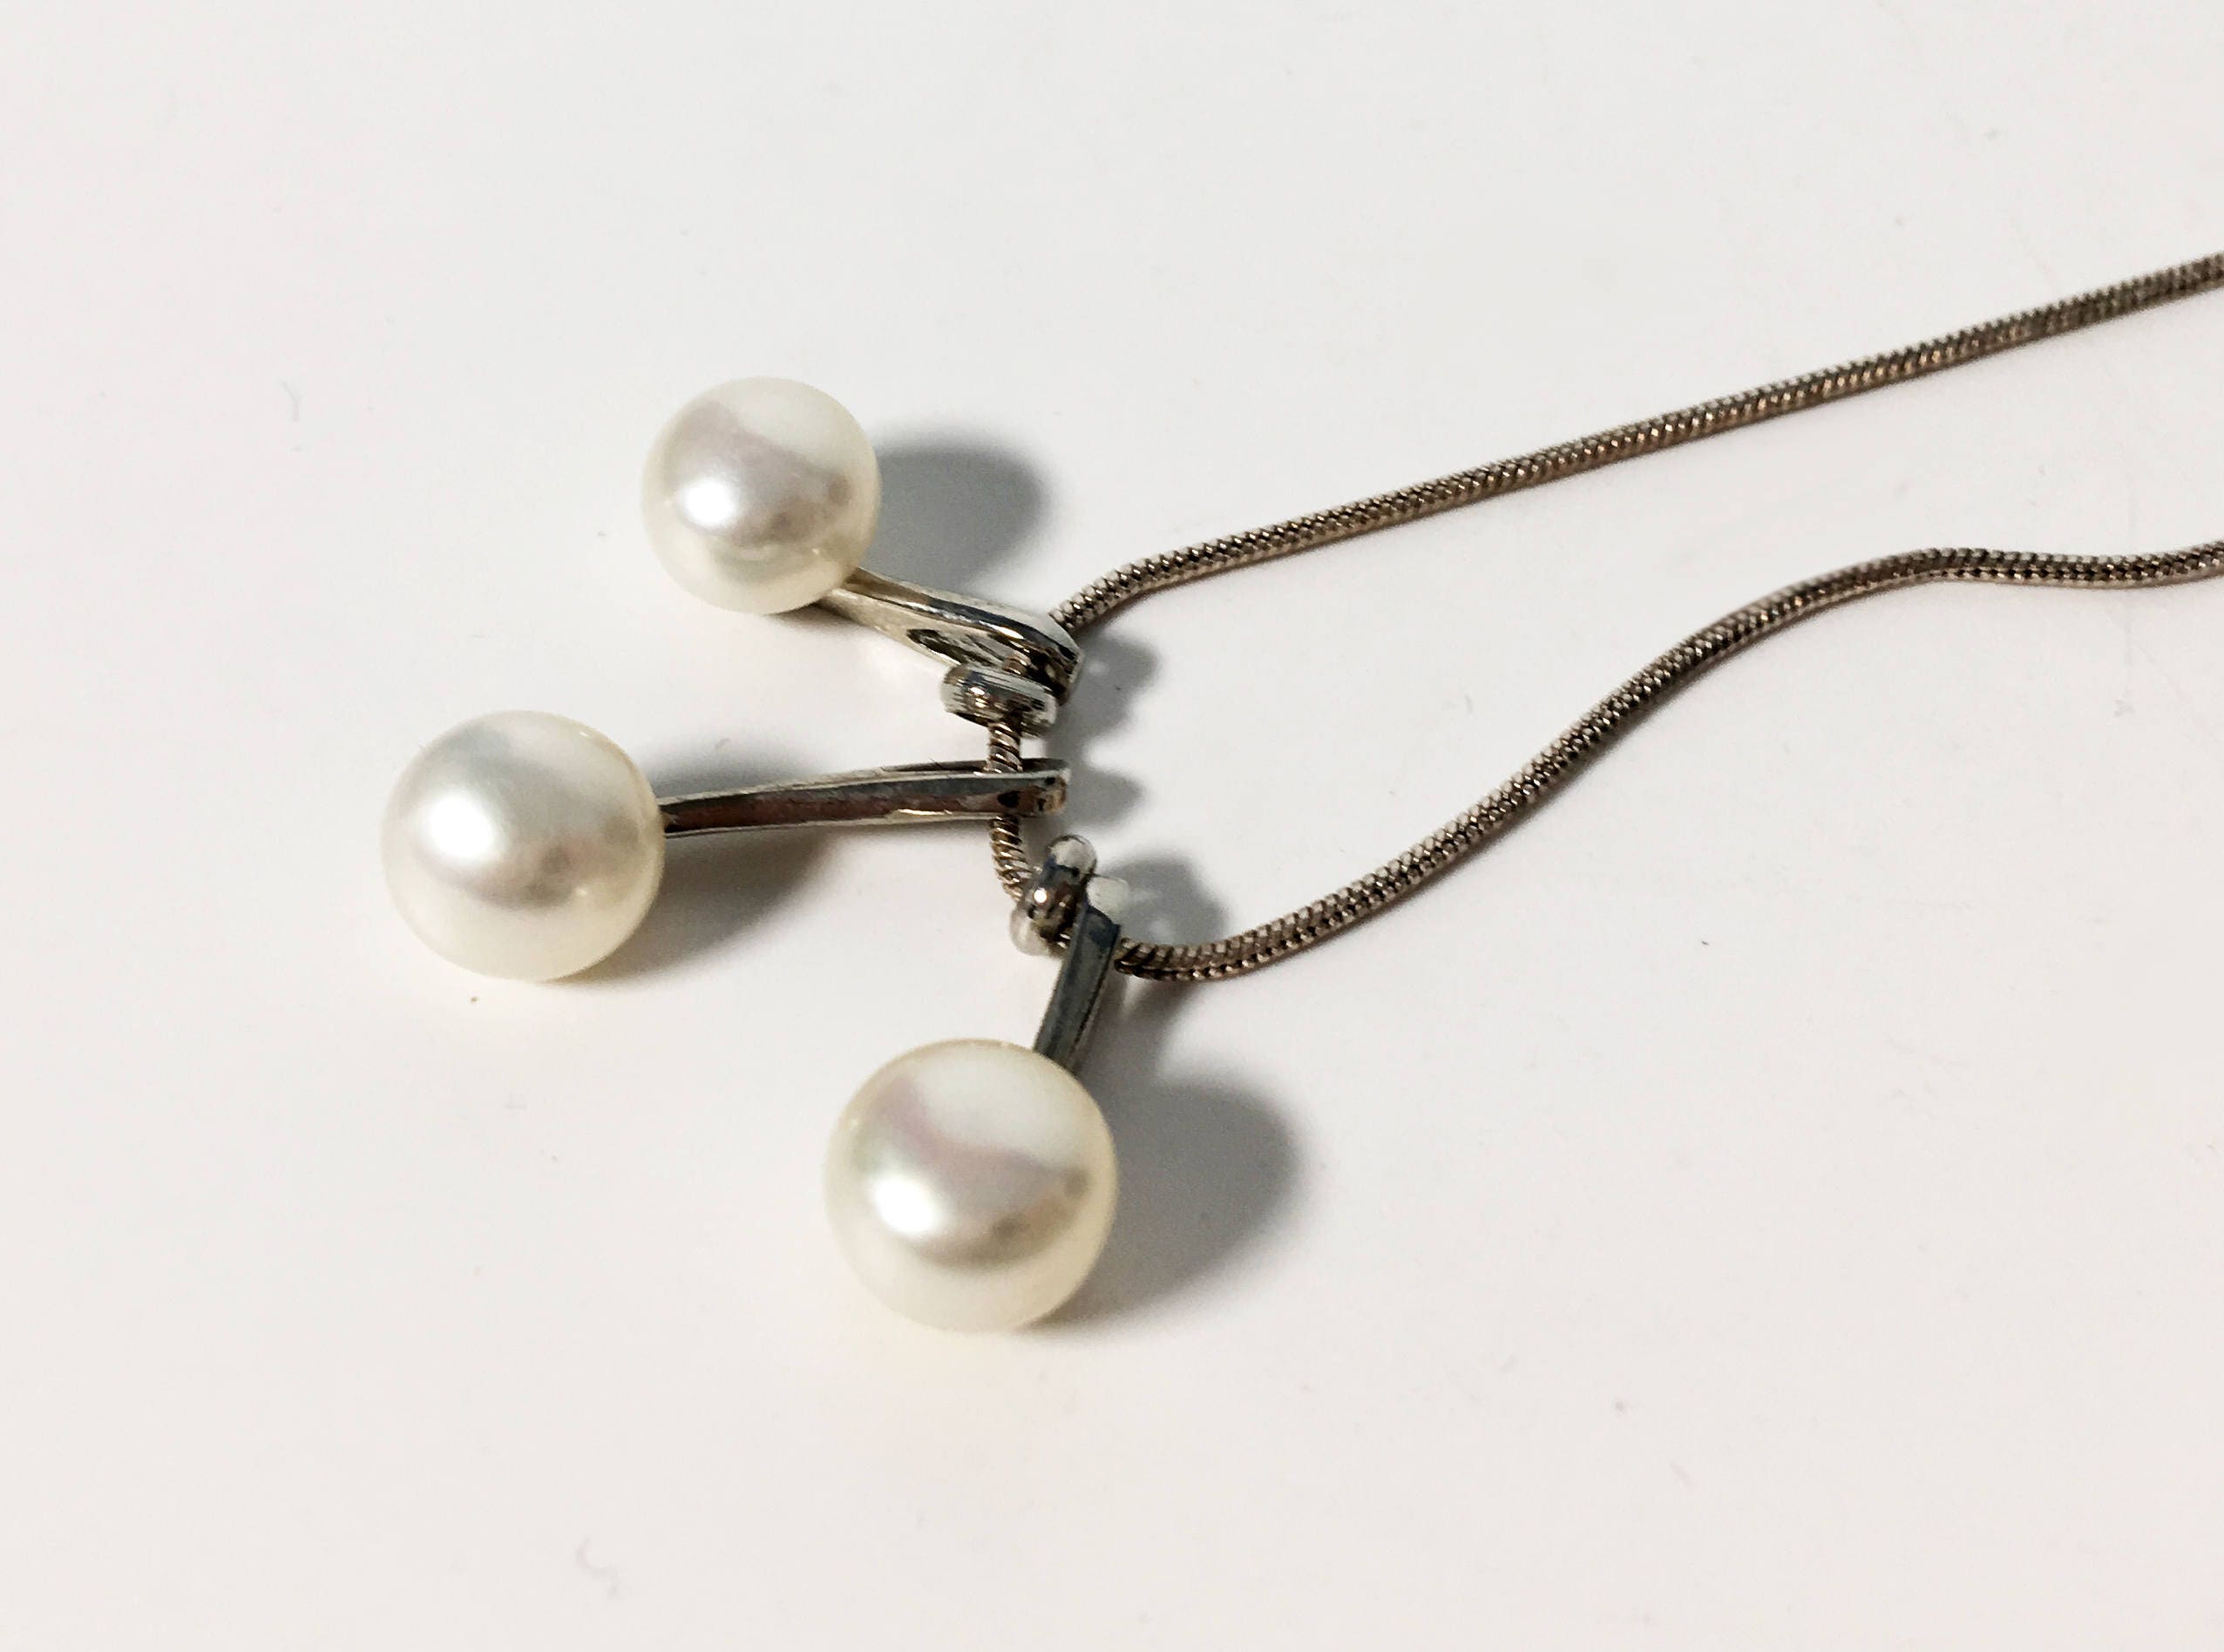 Vintage 3 Pearl Drop Necklace - Drop Pendant of 3 Pearls w/ Spacers on ...